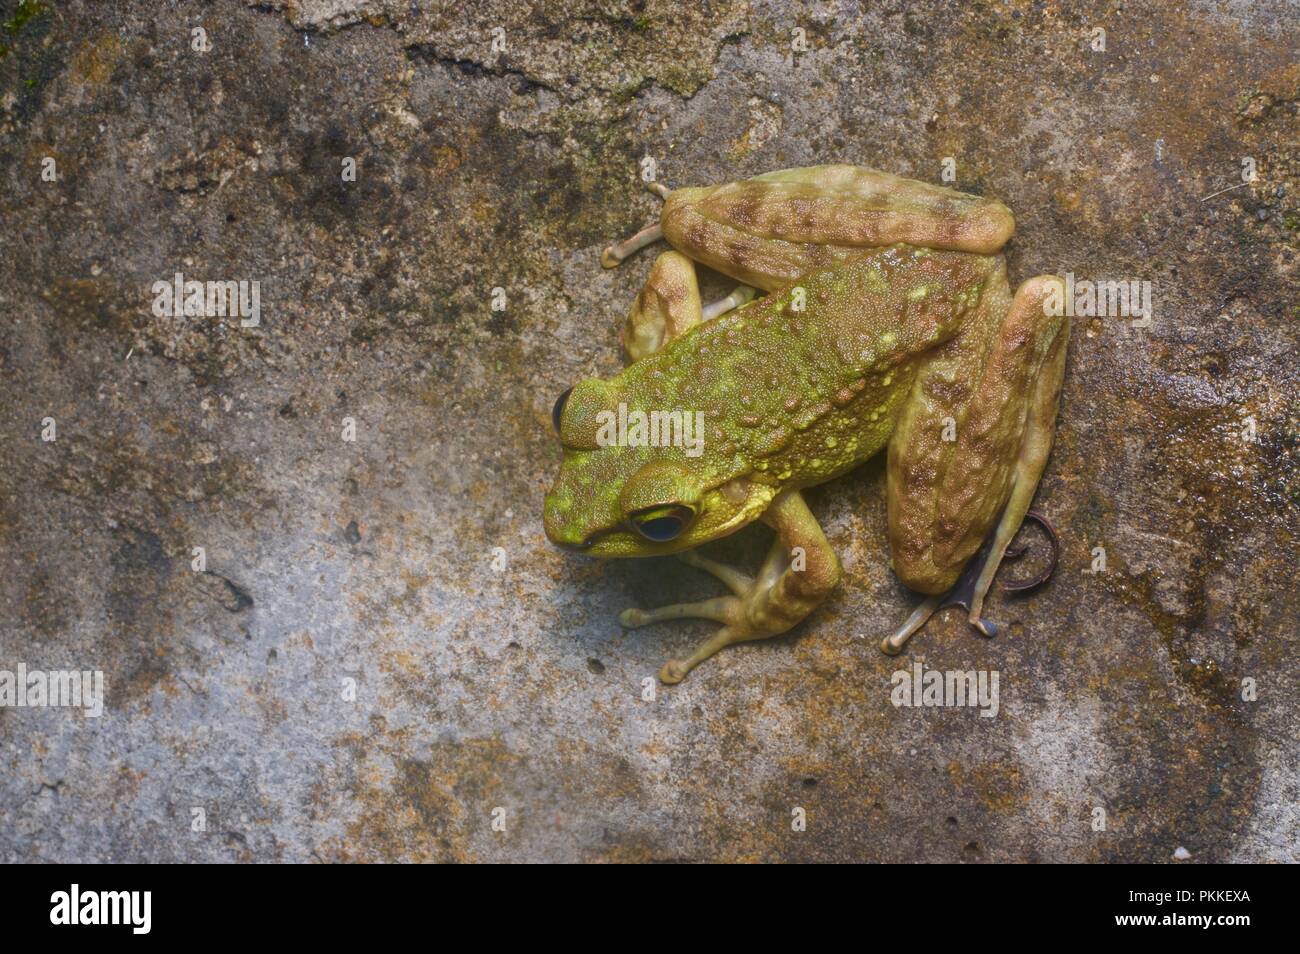 A Montane Torrent Frog (Meristogenys kinabaluensis) on a wet boulder in Kinabalu Park, Sabah, East Malaysia, Borneo Stock Photo